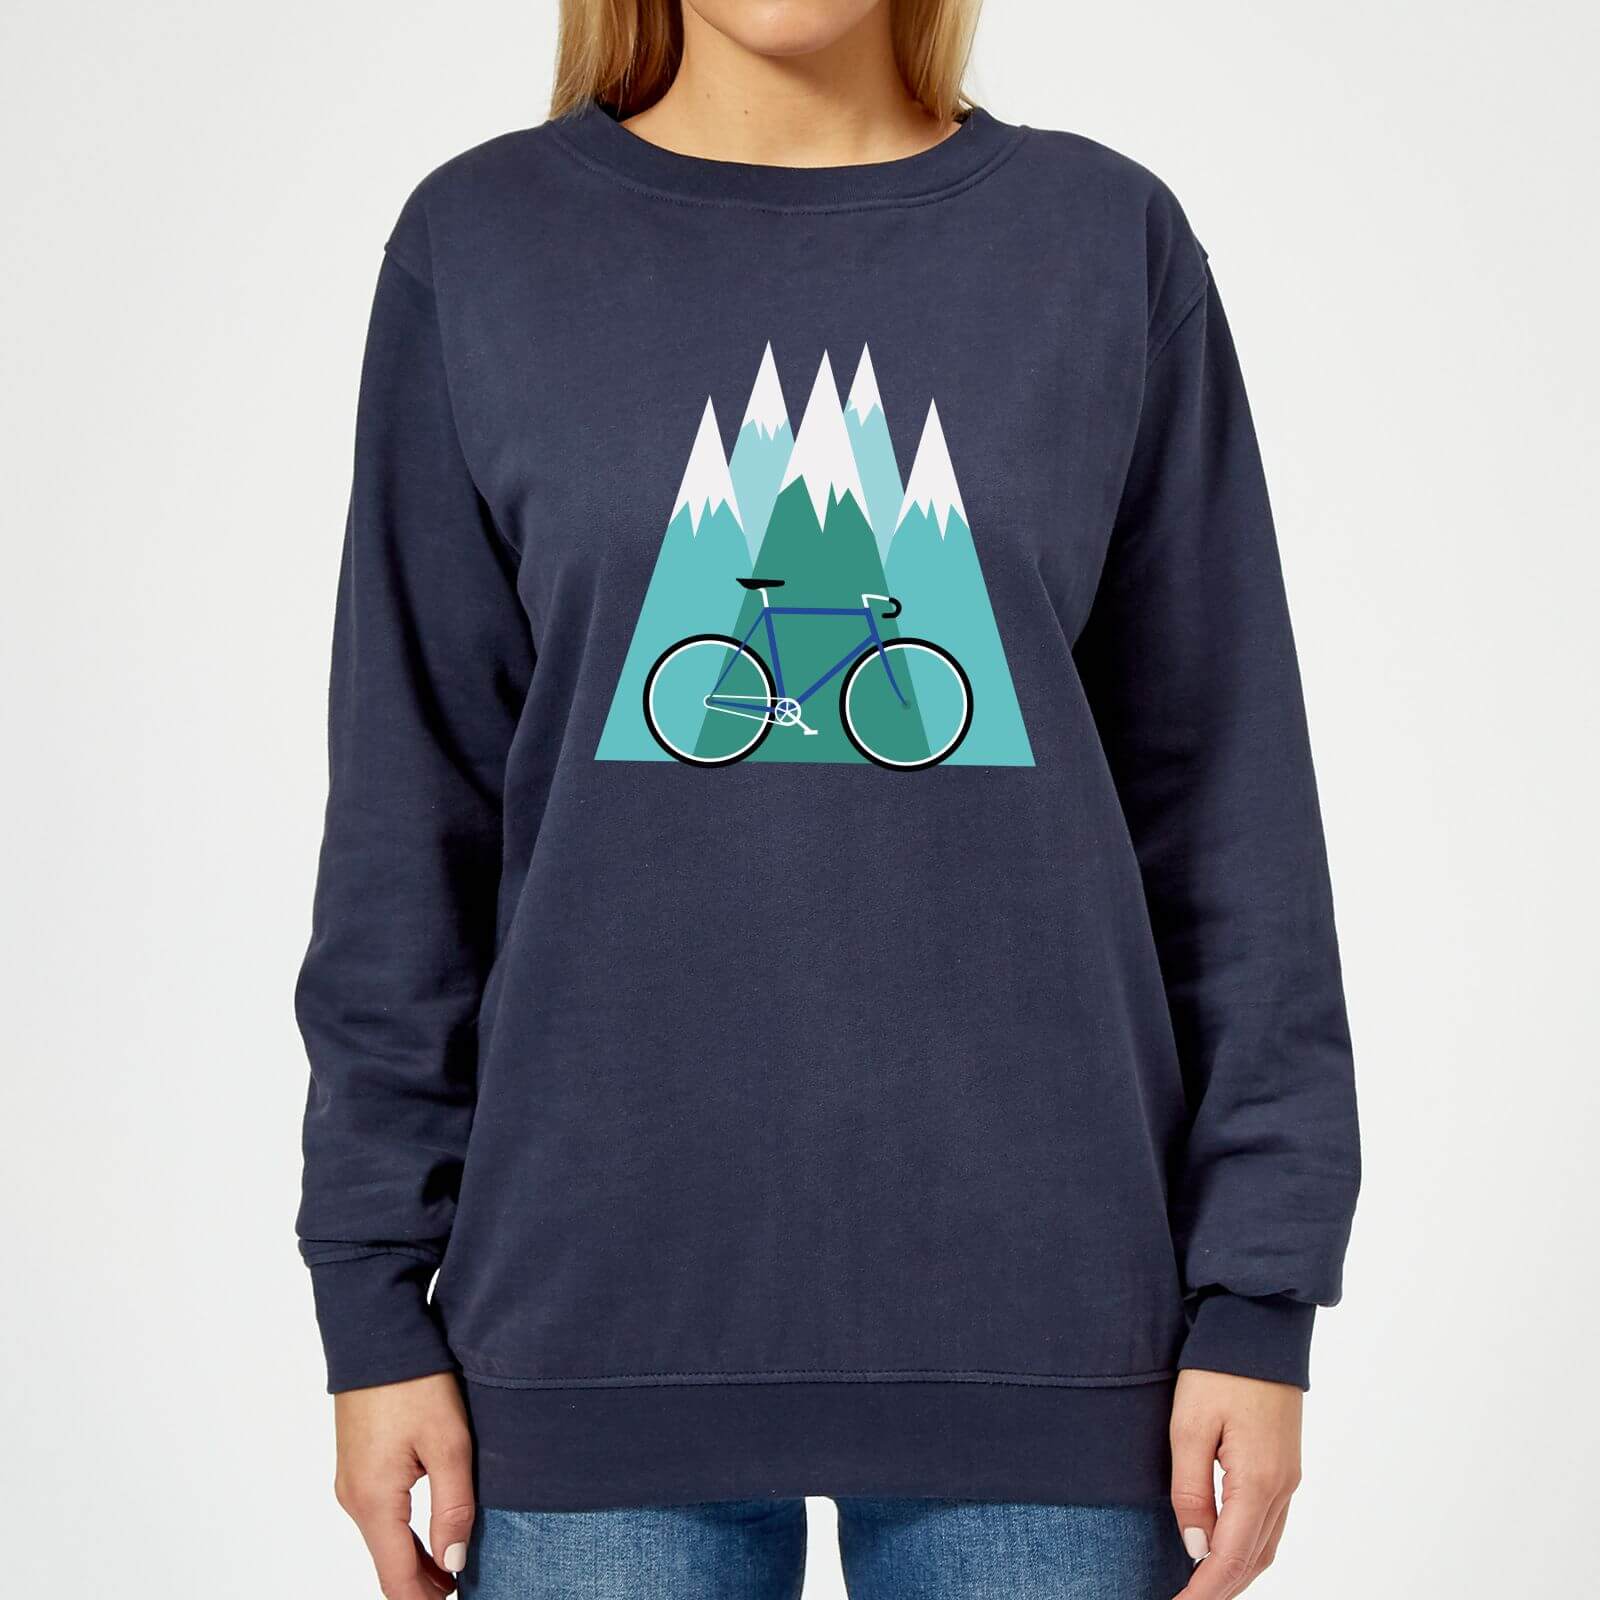 Bike and Mountains Women's Christmas Jumper - Navy - L - Navy